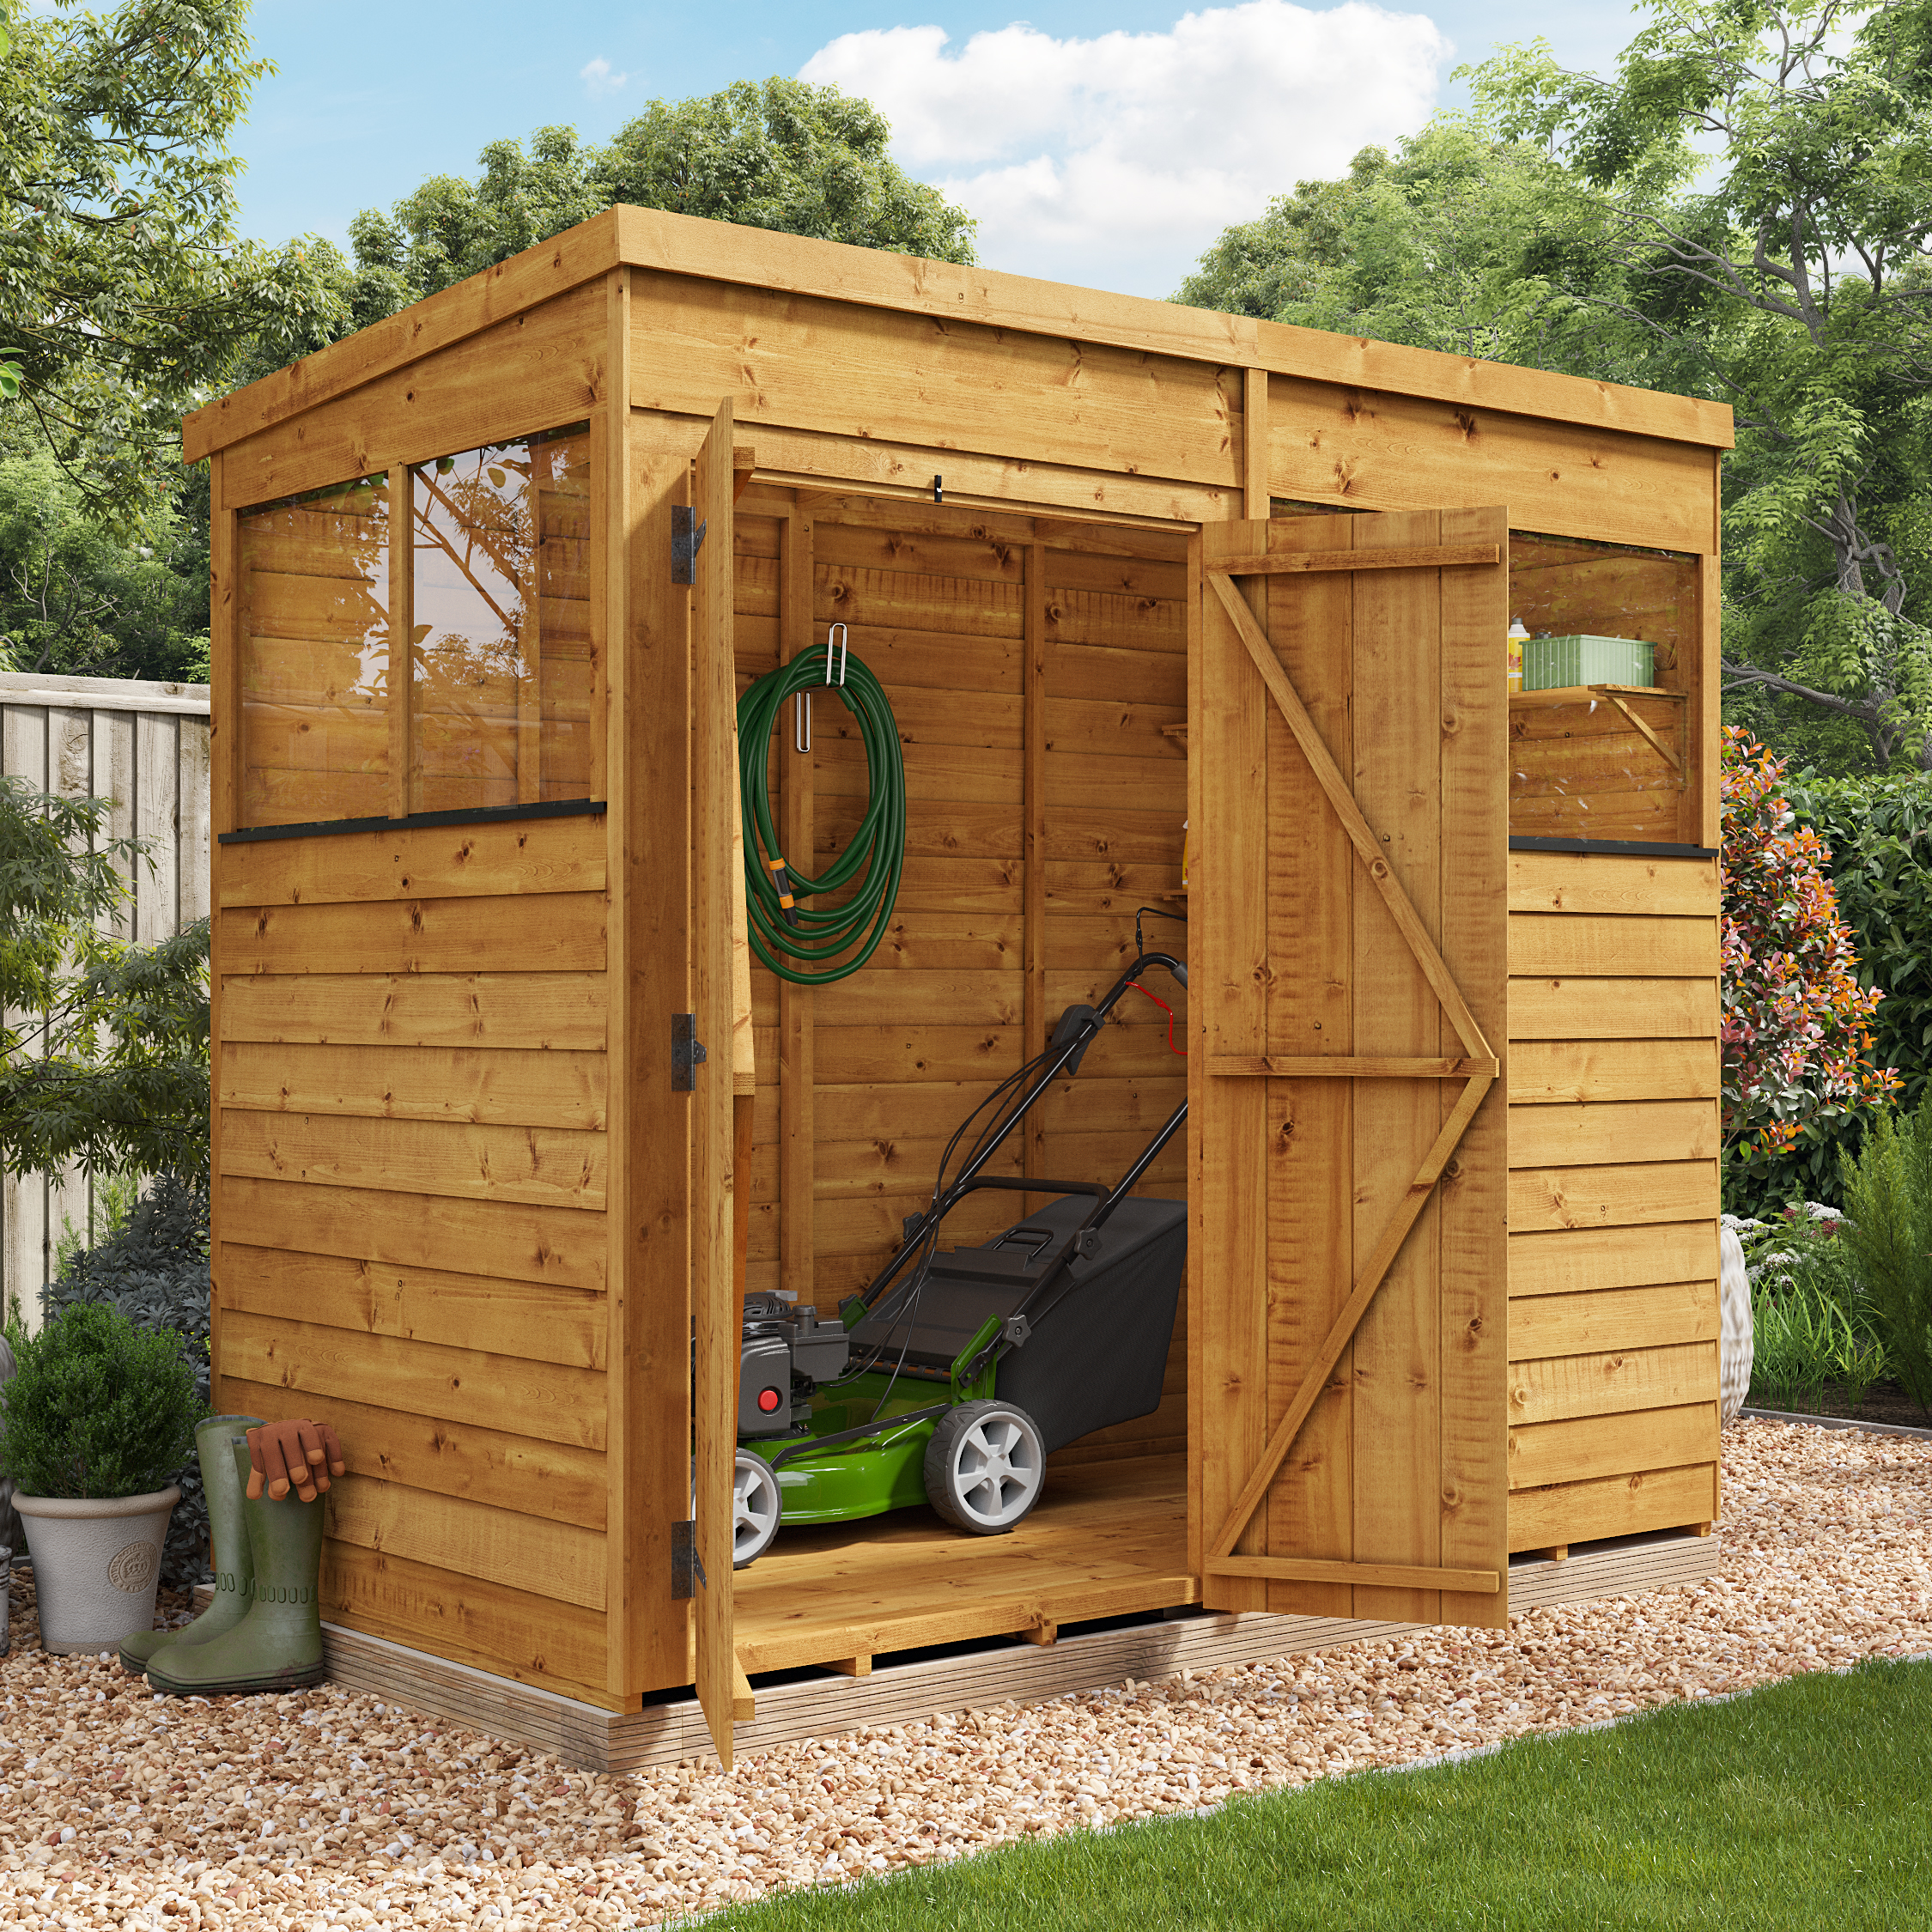 BillyOh Switch Overlap Pent Shed - 8x4 Windowed